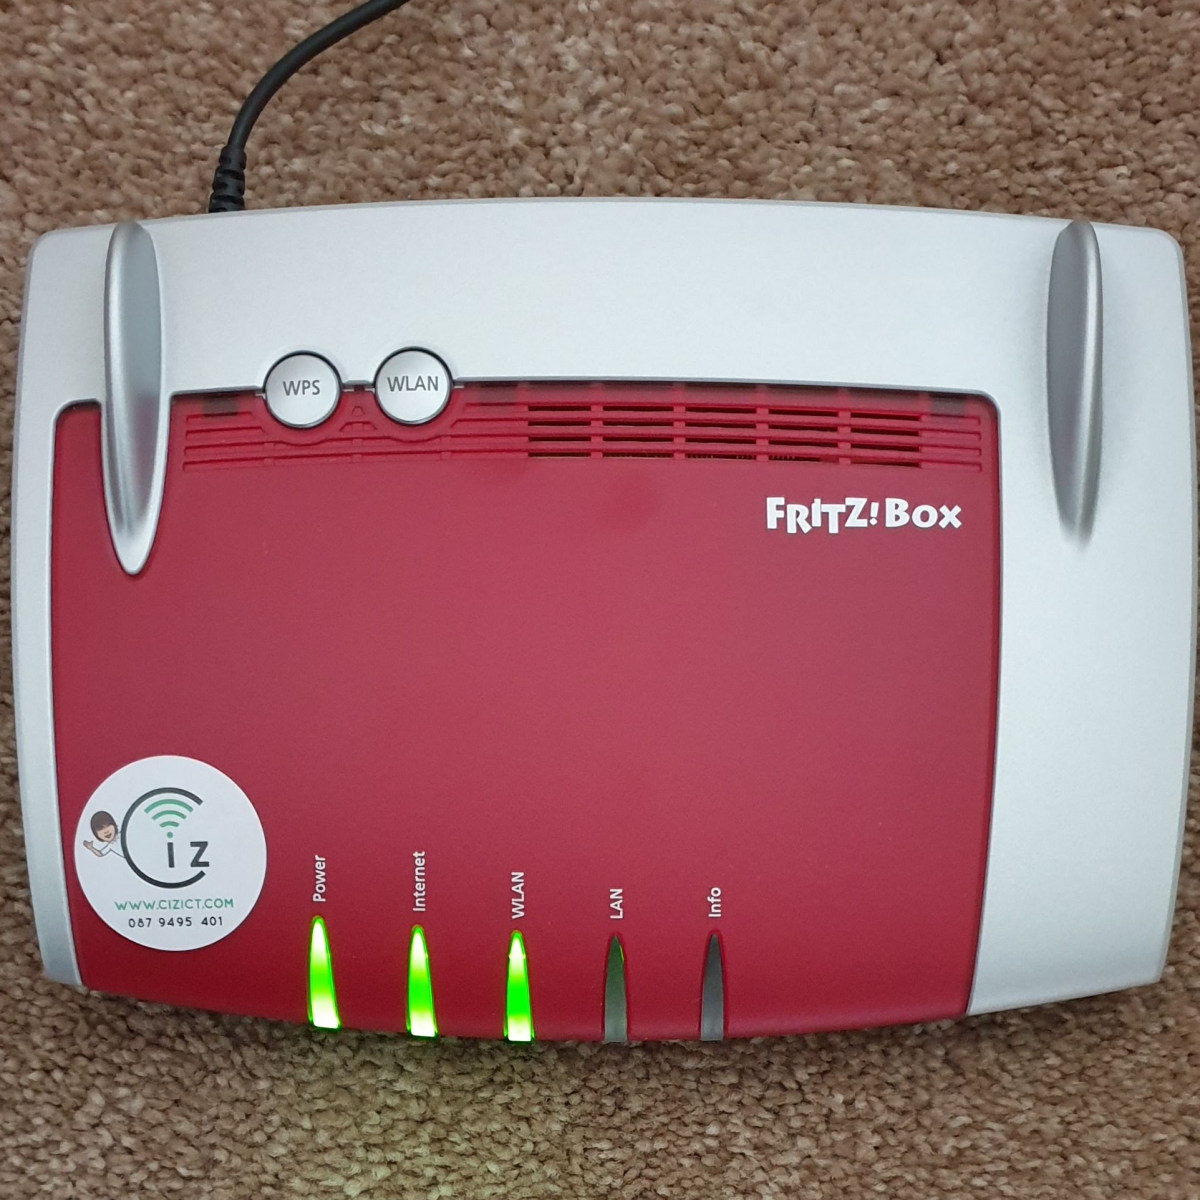 A Fritzbox 4040 Wireless Router with Ciz ICT logo